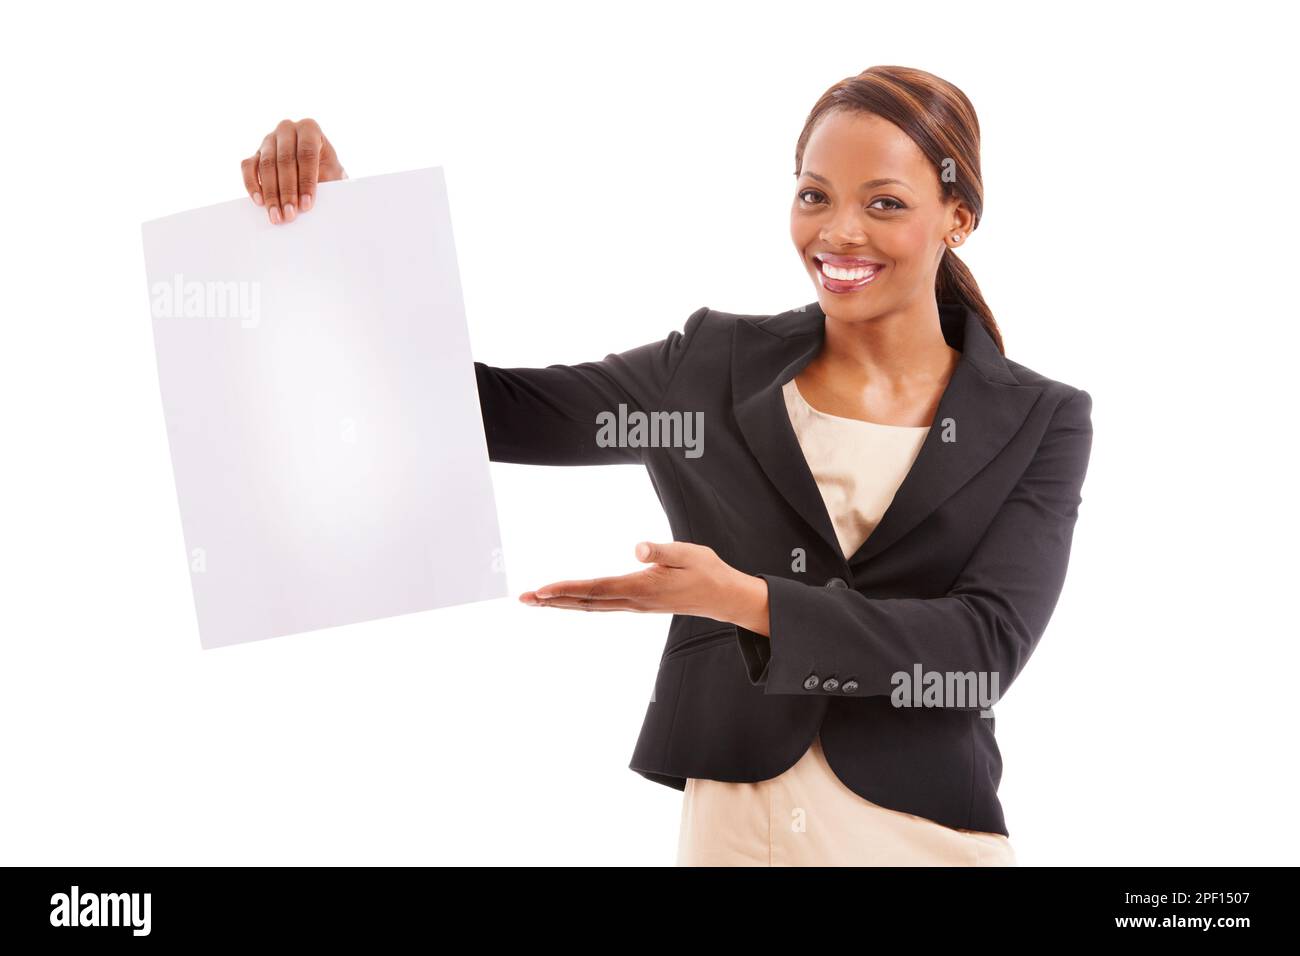 Advertising our amazing company. Portrait of an ethnic smiling woman with corporate clothing on holding up a blank piece of paper. Stock Photo